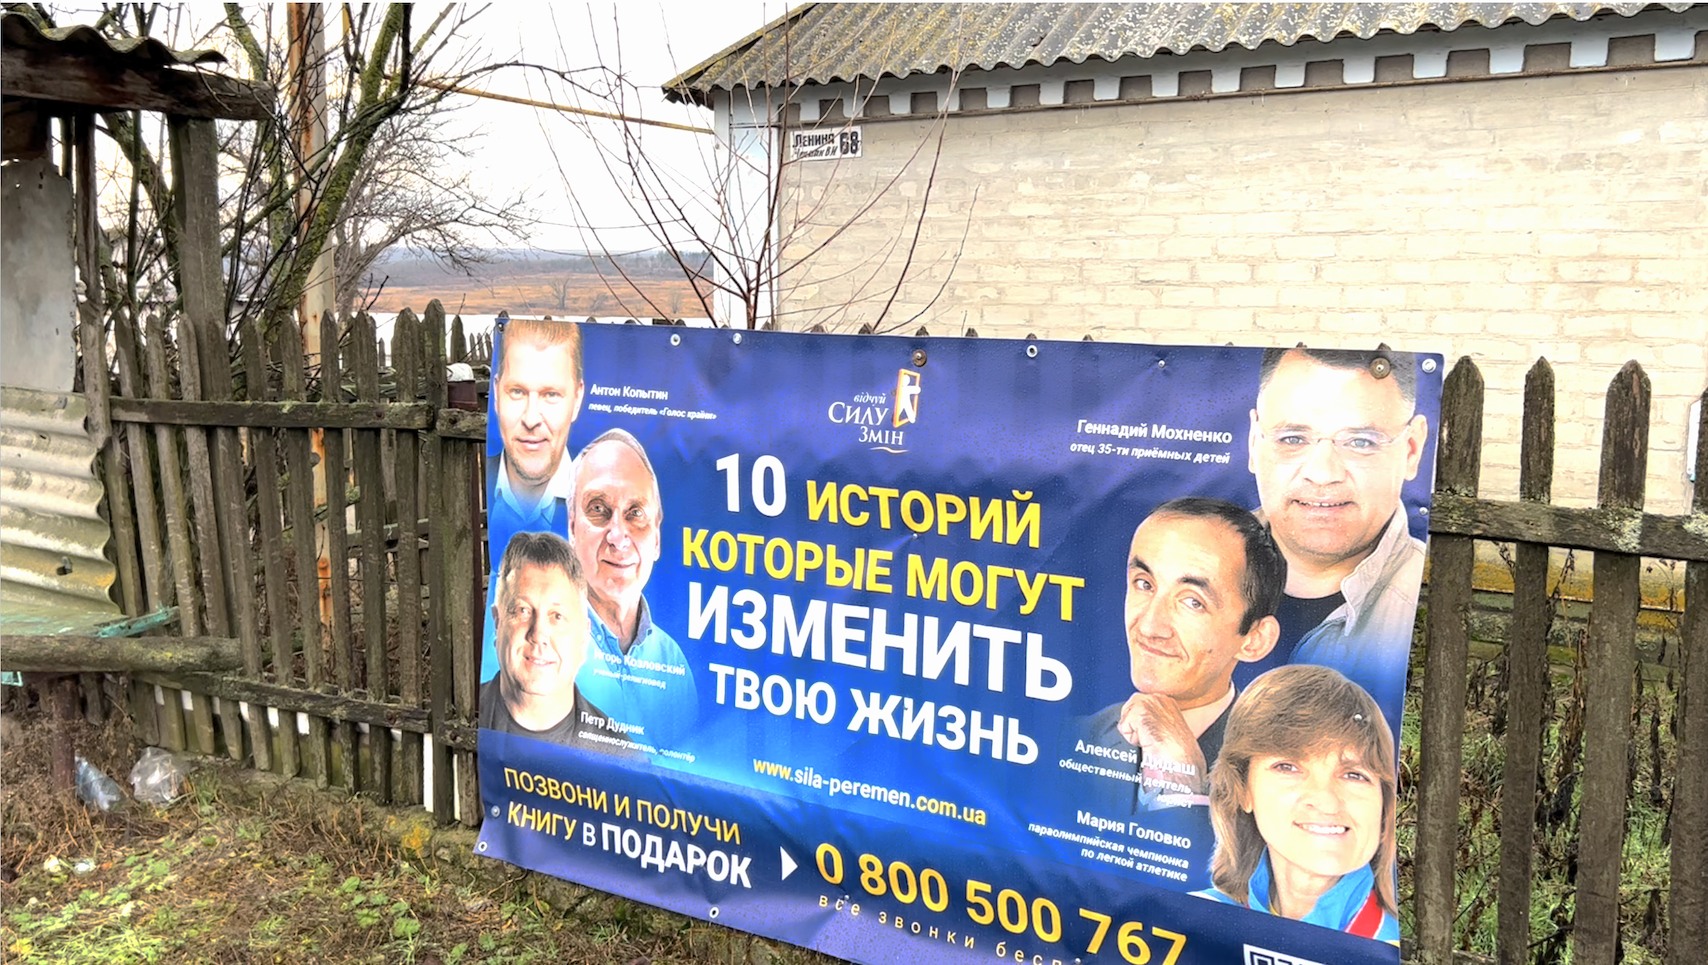 The village of Chermalyk in the conflict zone. A campaign ad on the fence tells of God's life-changing power through the testimony of 10 highly recognizable people.